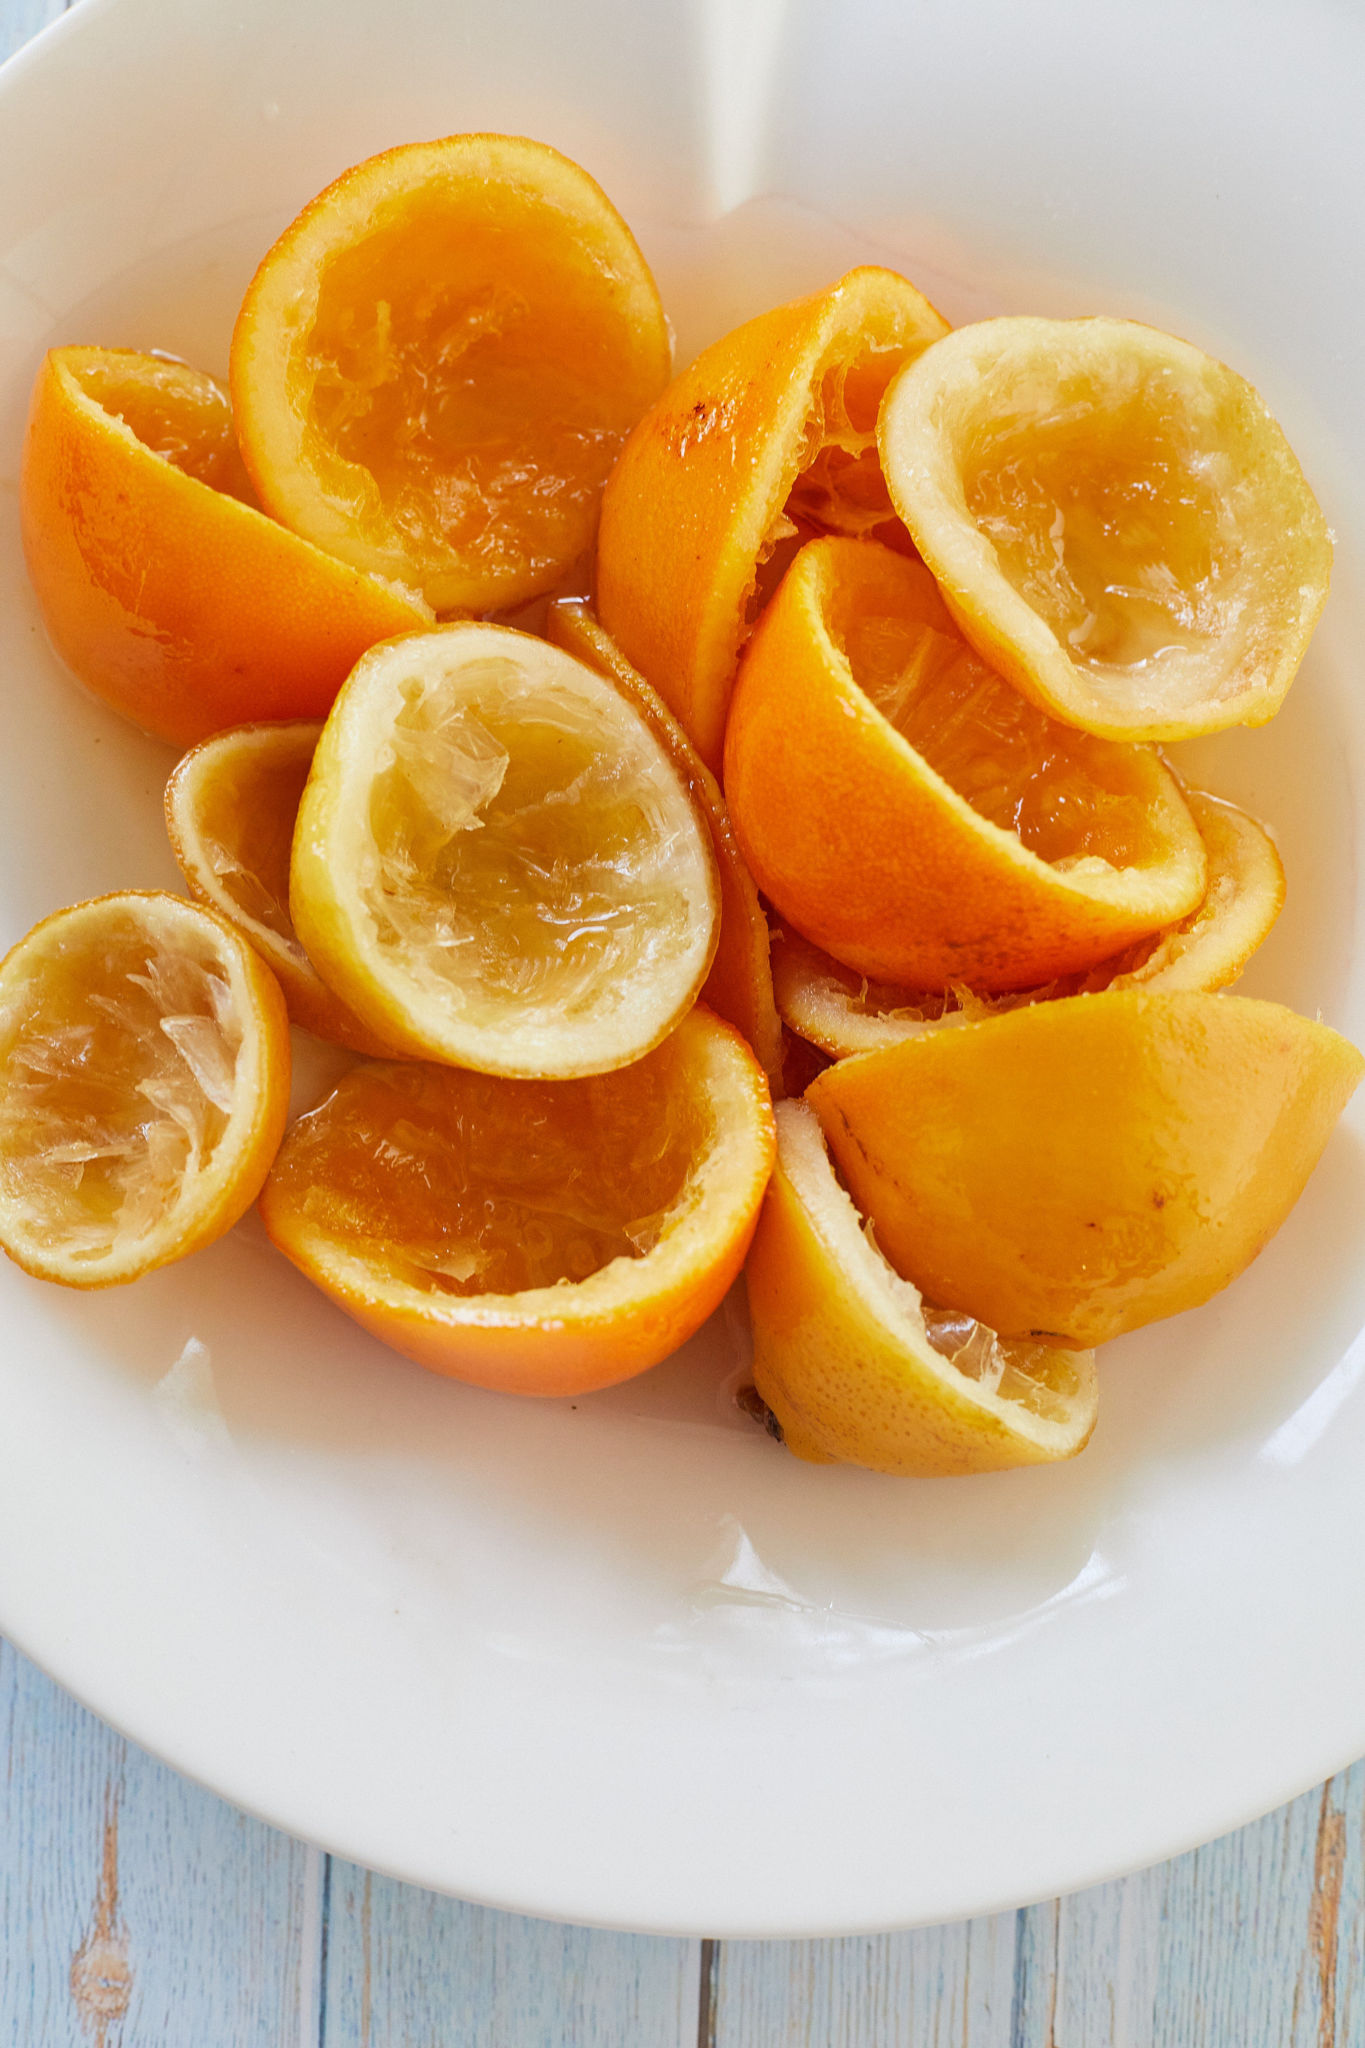 My candied mixed peel recipes uses both oranges and lemons, shown here in a bowl.